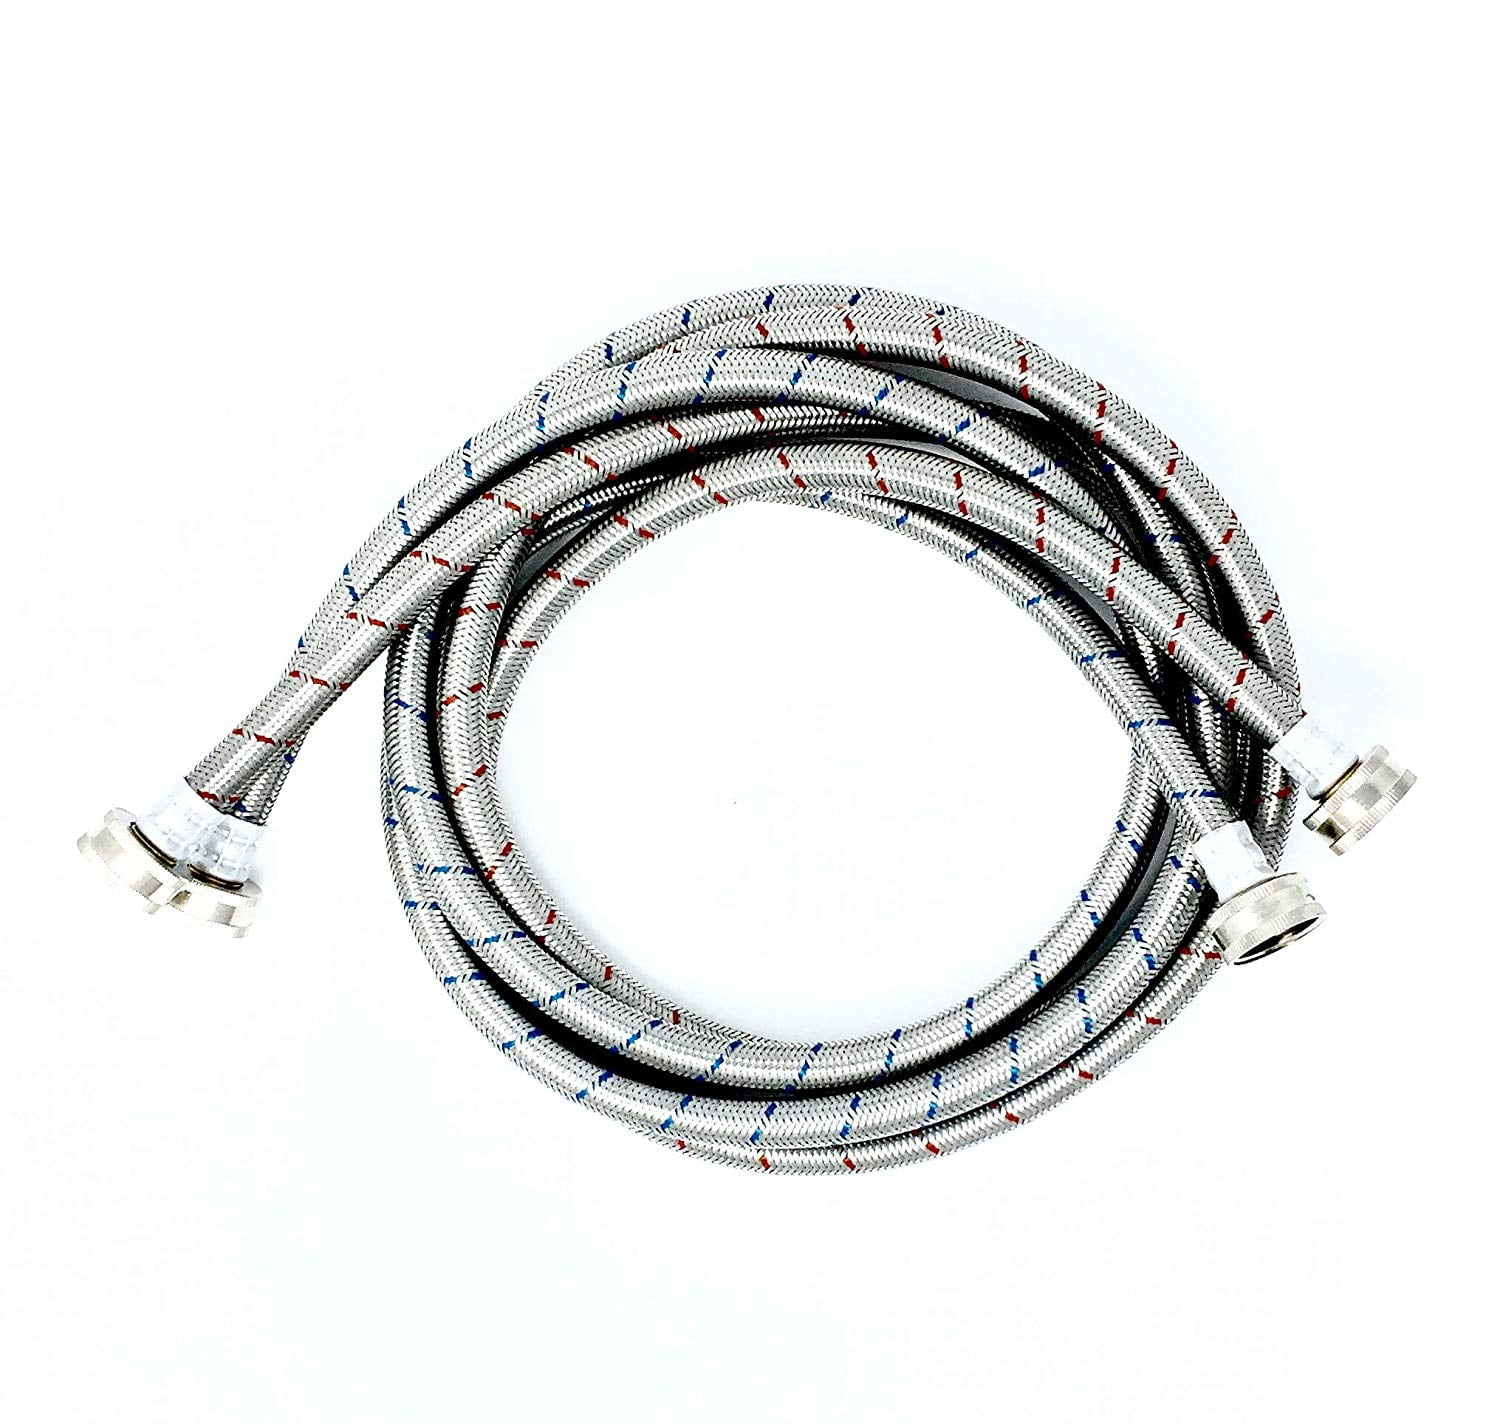 Grey - 2 Pack Washer Hoses Partsmaster 6 ft PMWSS-6 